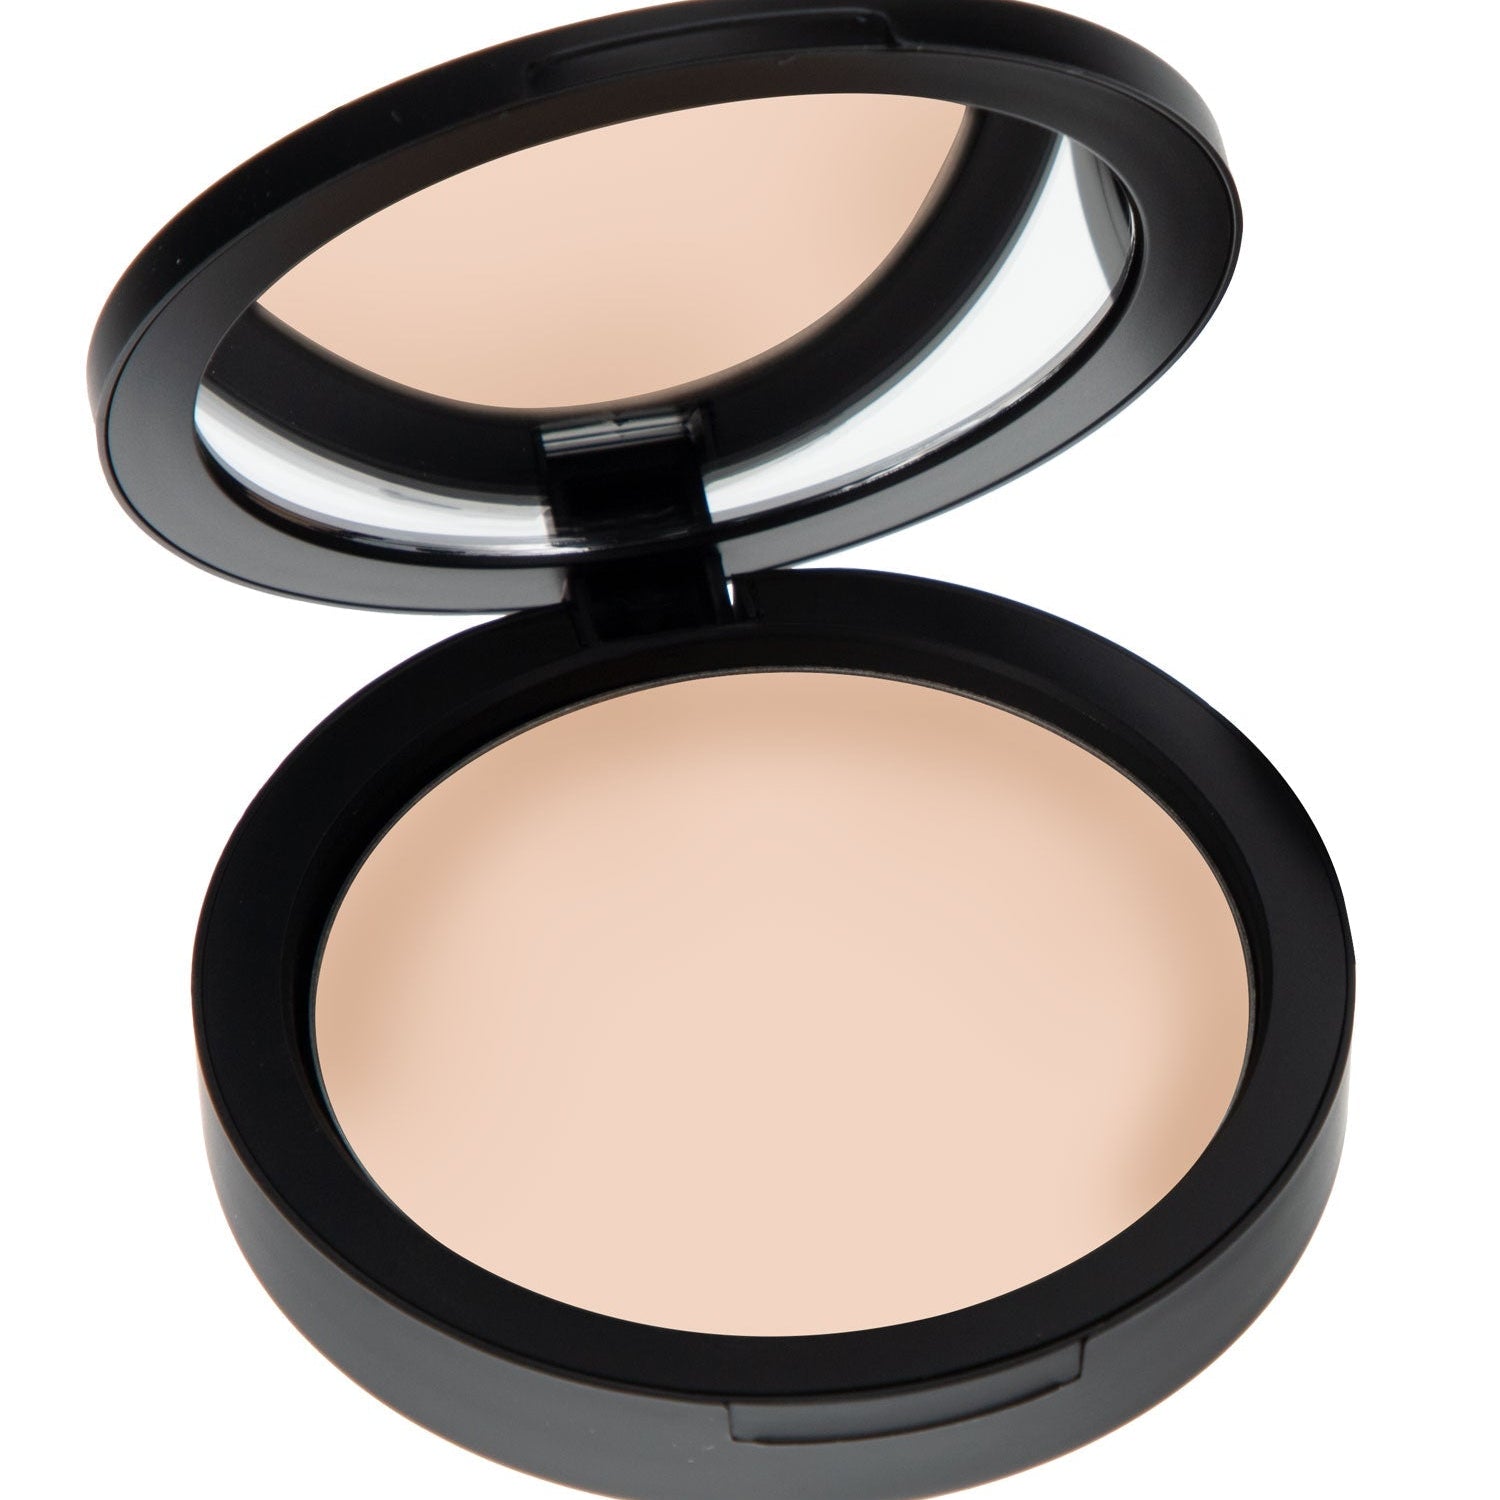 Mineral Based 4-in-1 Product is your PRESSED Powder, Foundation, SPF 15 and Soft Focus Finish All in One! No loose powder mess! Formulated without talc, gluten, phthalates, fragrance, GMO, parabens, or corn. CUDDLE (Light/Medium) - For light to medium complexions. 